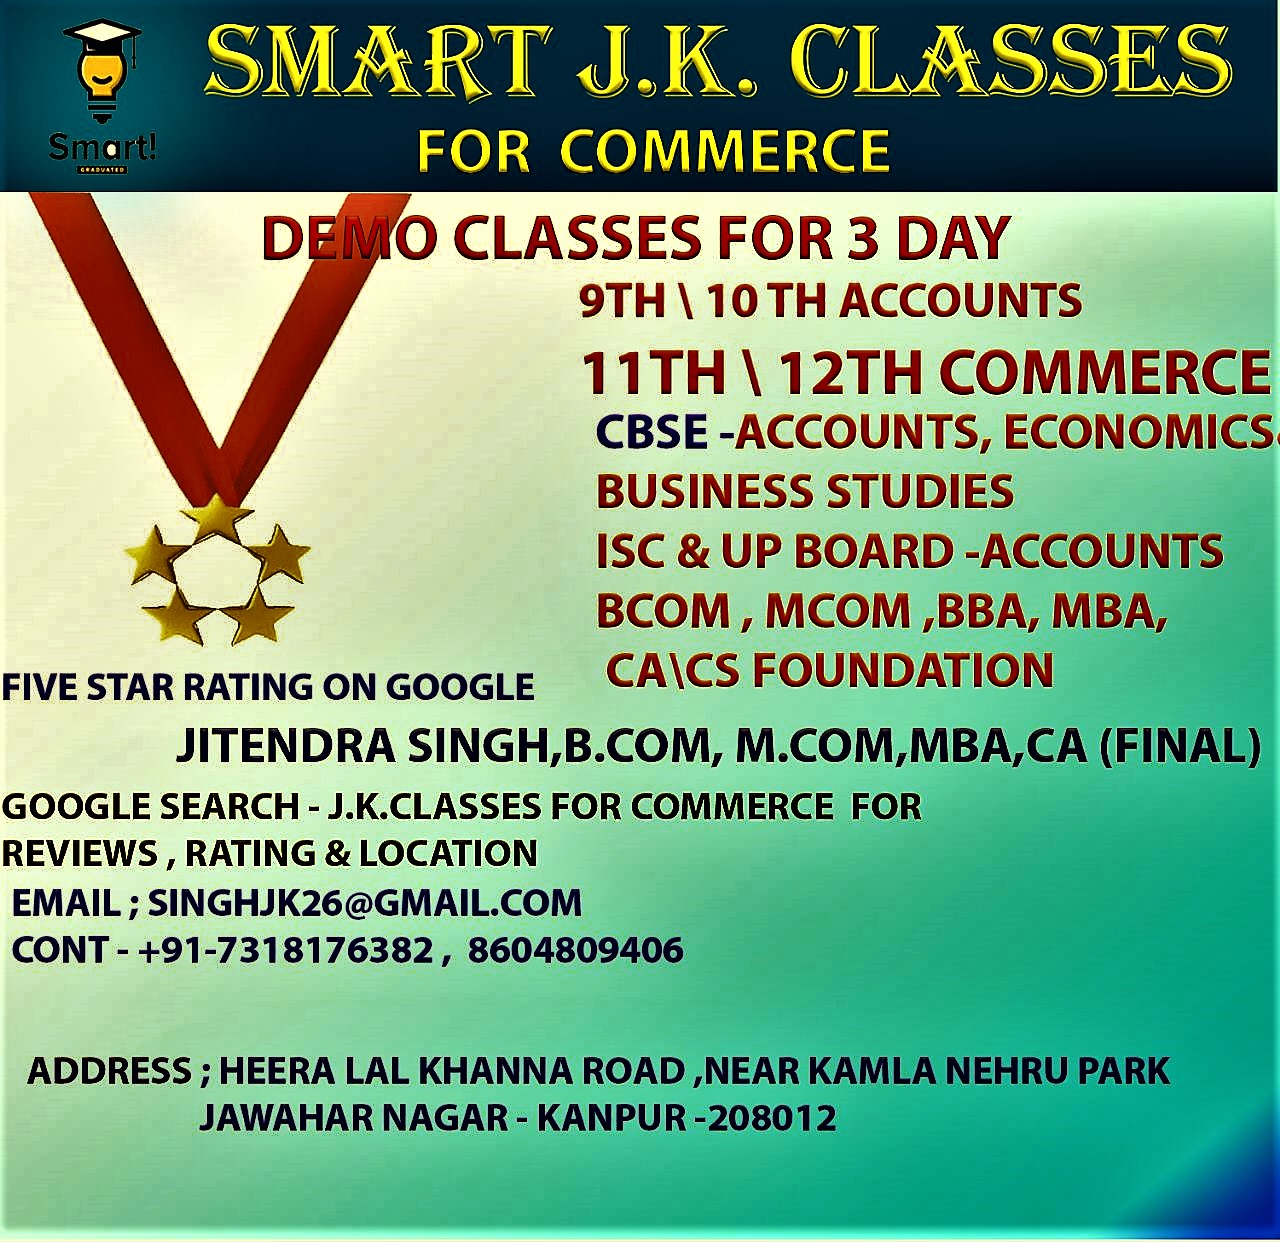 24101SMARTJK.CLASSES for COMMERCE
Class 11th Accountancy